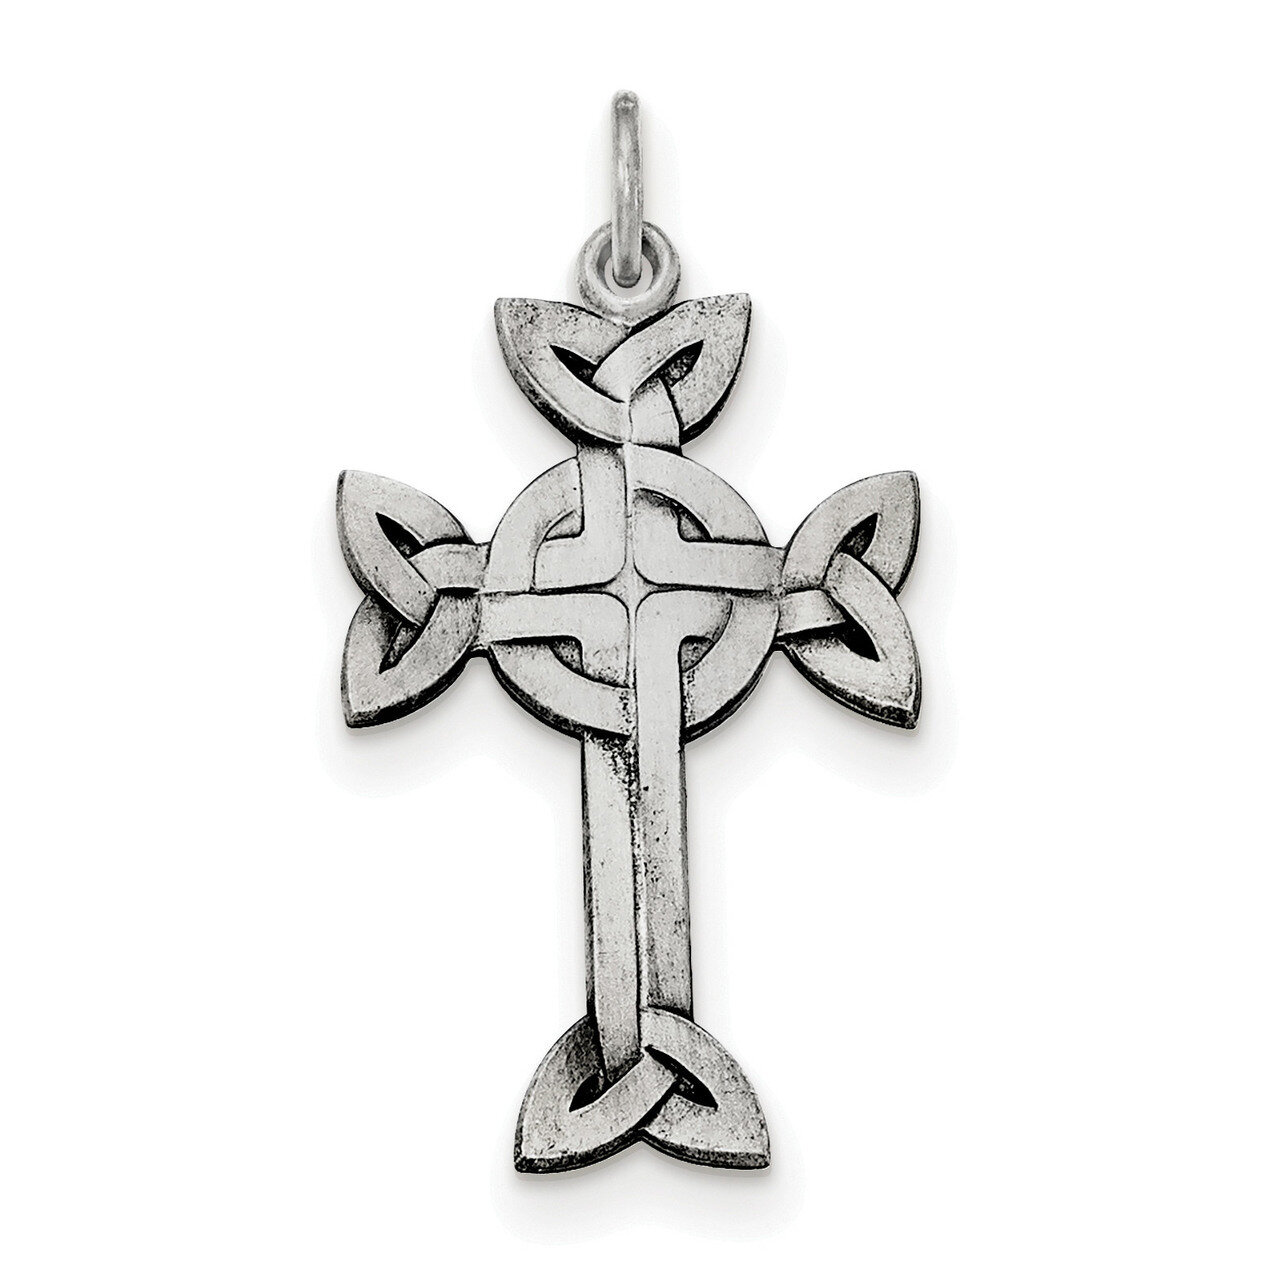 Textured and Brushed Celtic Cross Pendant Sterling Silver Antiqued QC8189